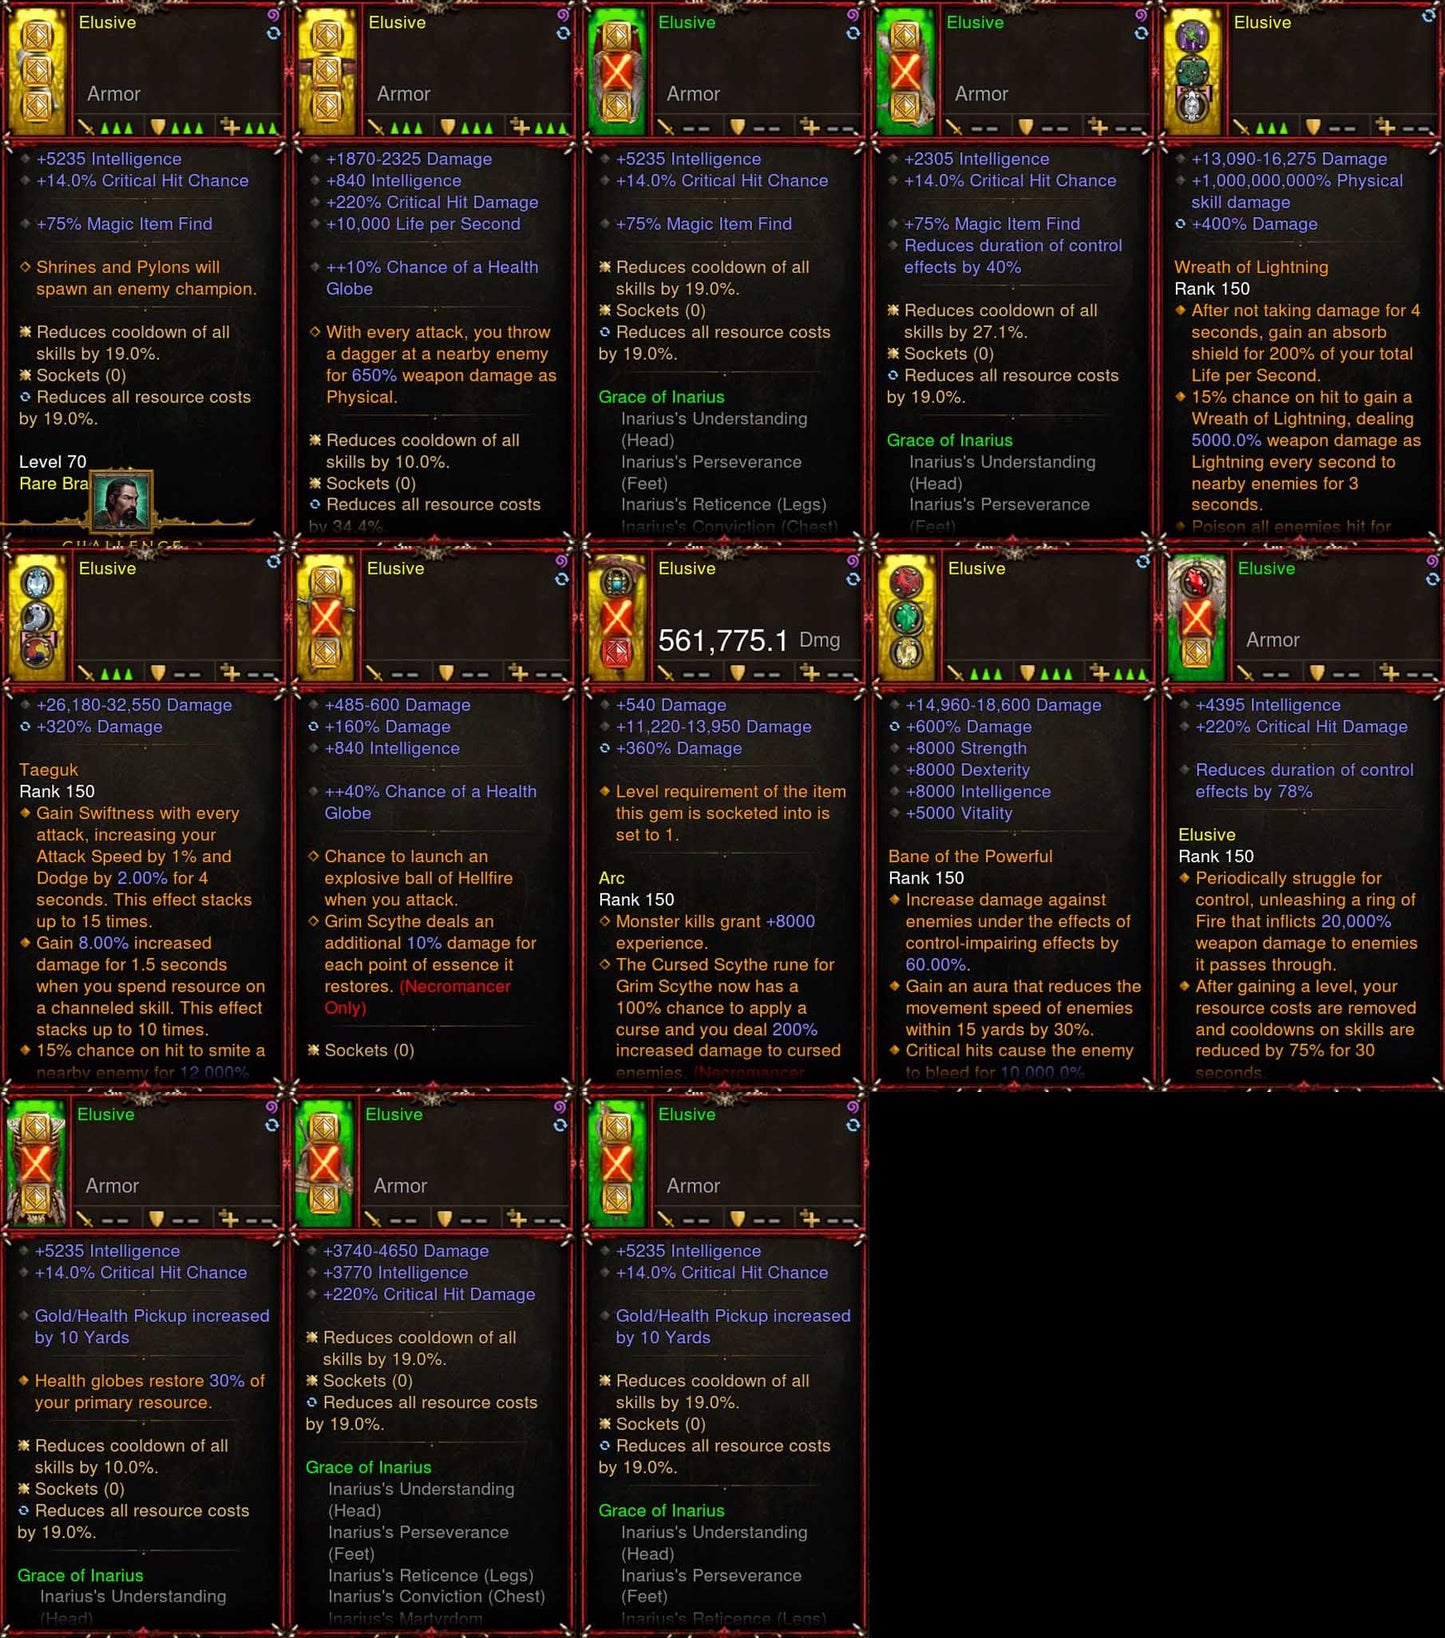 [Primal Ancient] [Quad DPS] Diablo 3 Immortal v5 Necromancer Inarius gRift 150 (Magic Find, High CDR, RR) Elusive Diablo 3 Mods ROS Seasonal and Non Seasonal Save Mod - Modded Items and Gear - Hacks - Cheats - Trainers for Playstation 4 - Playstation 5 - Nintendo Switch - Xbox One